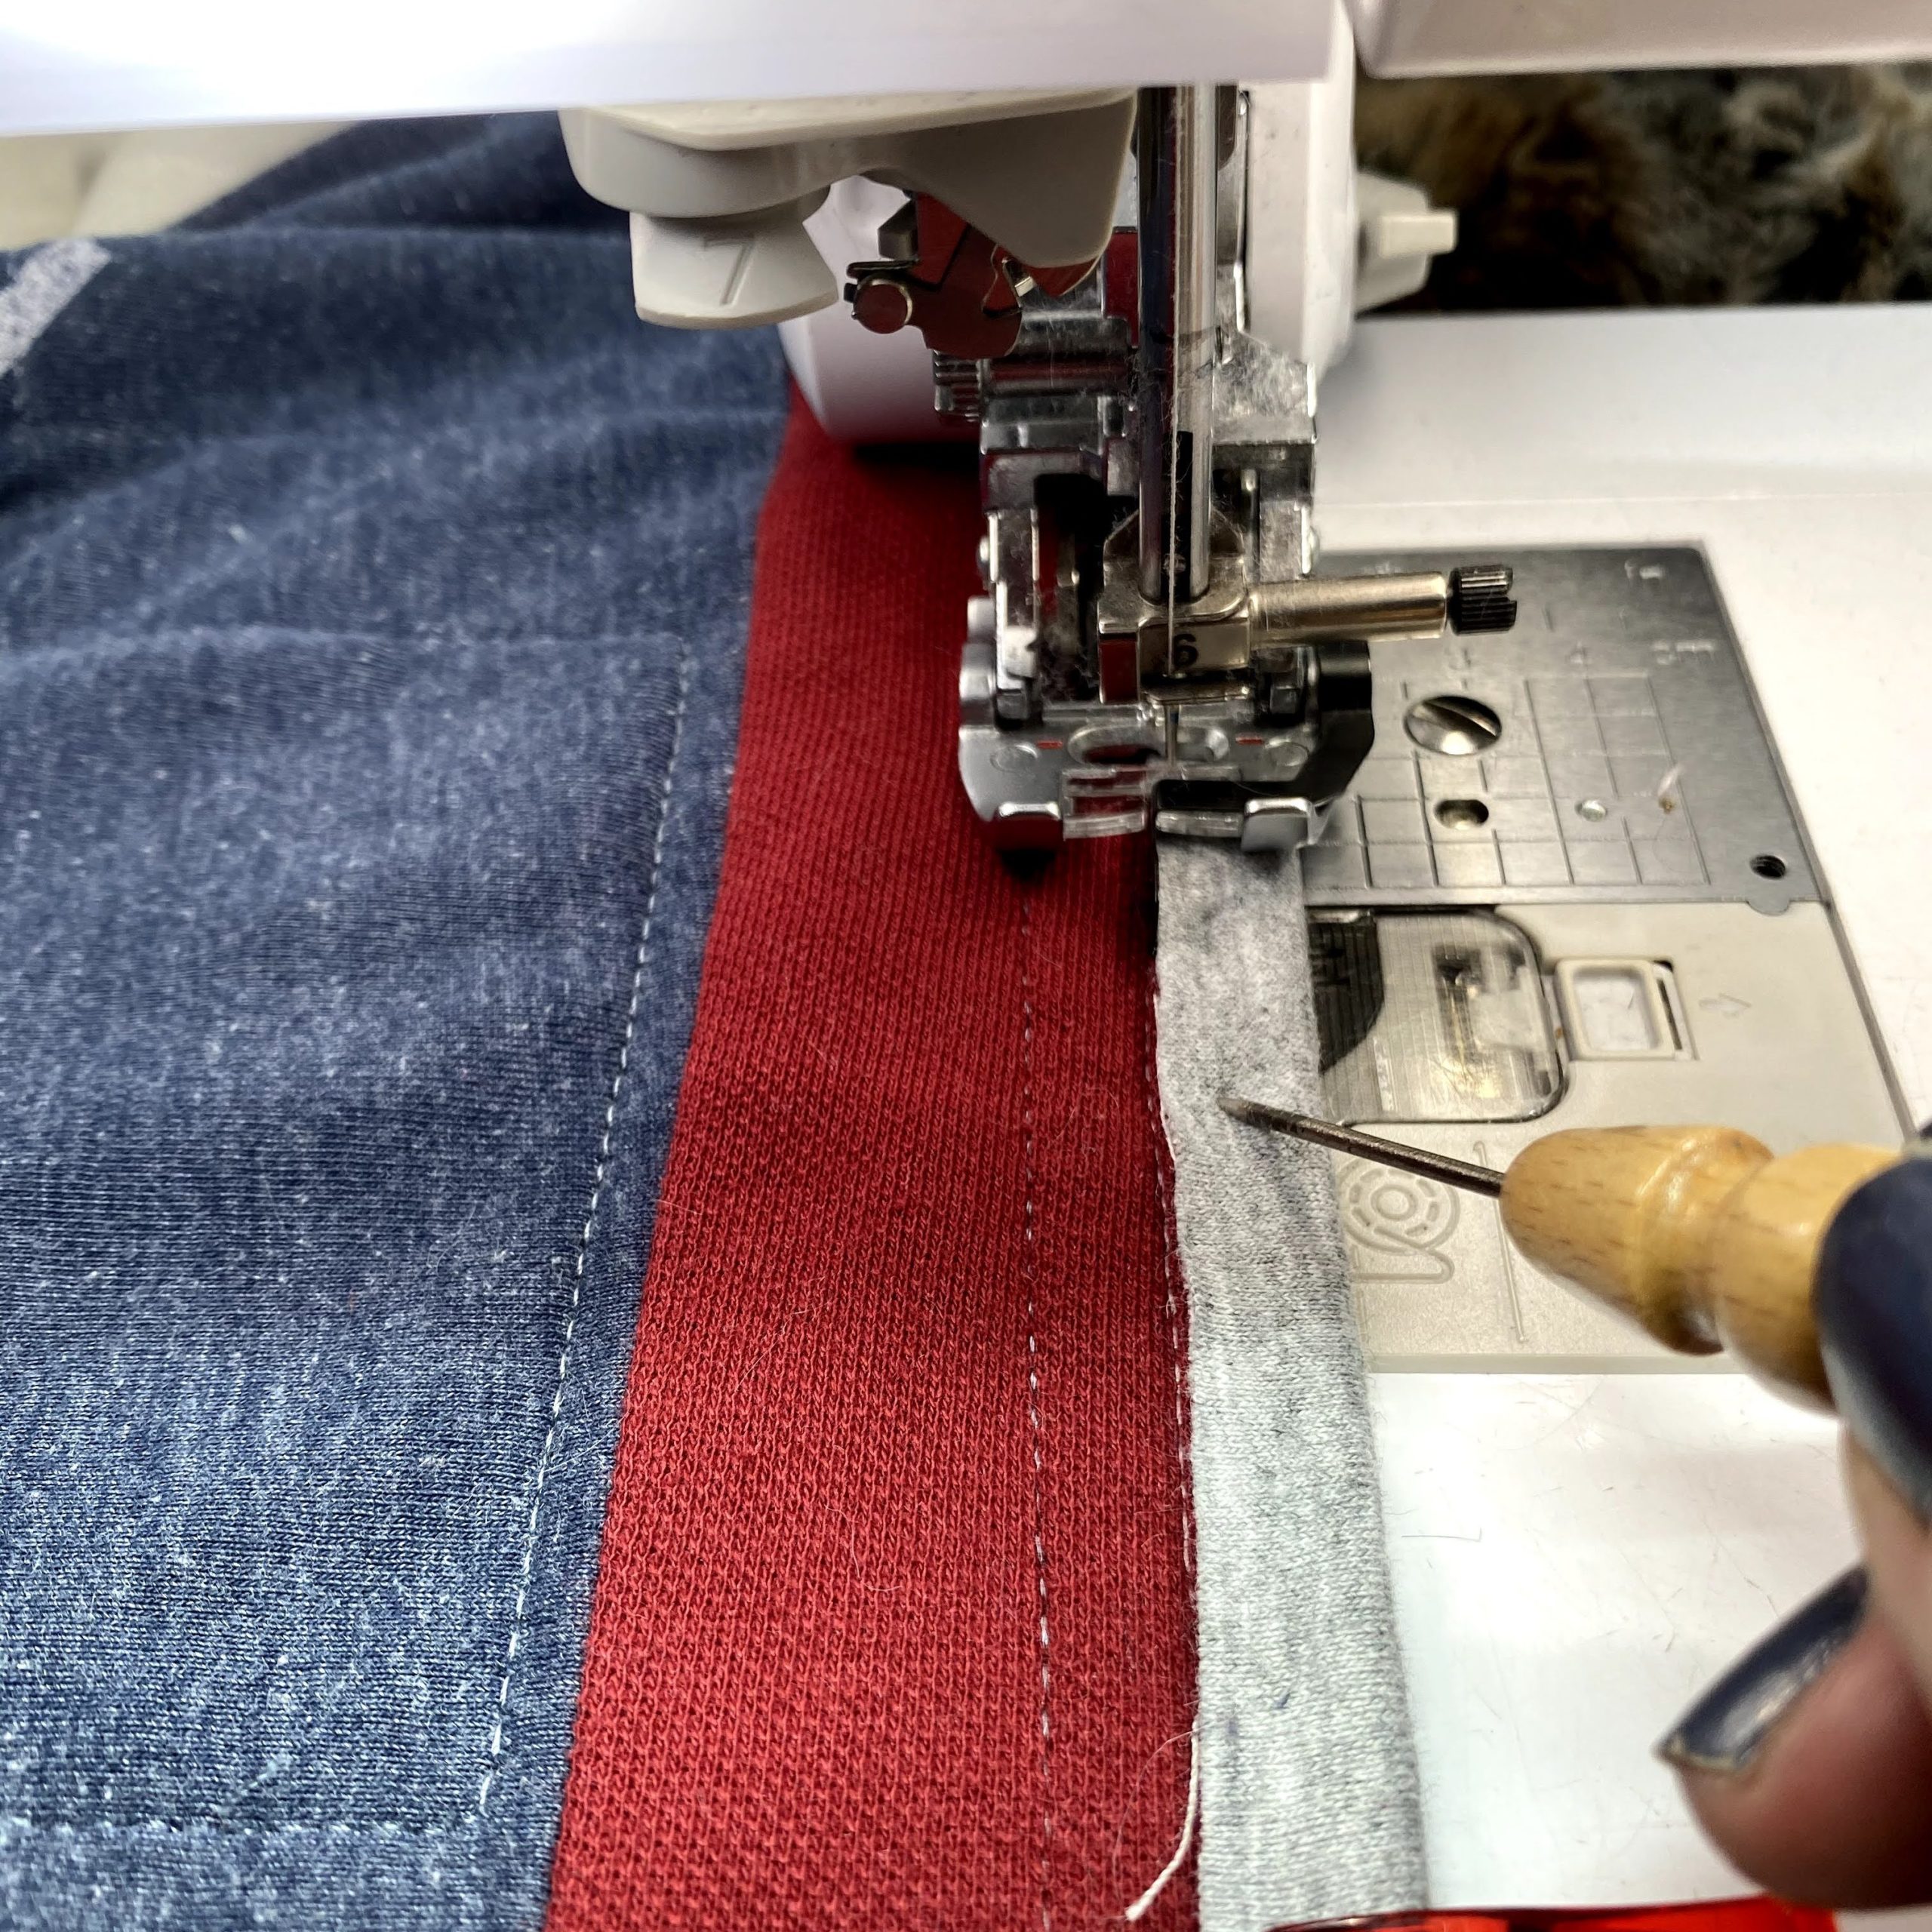 How I Used Jersey Knit for a Quilt Binding – Teresa Coates